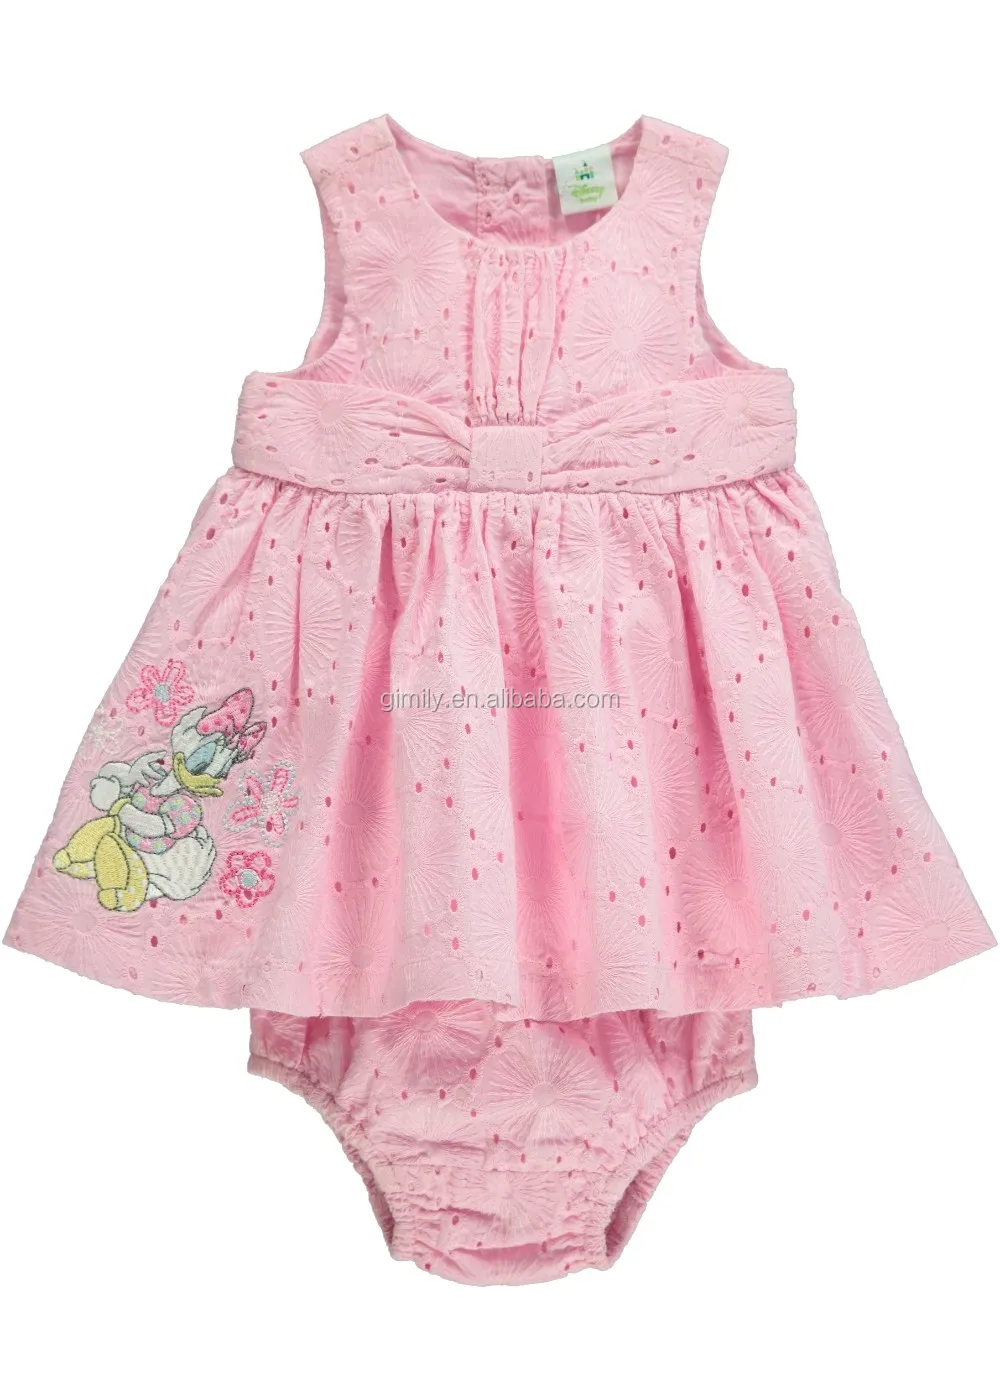 5 months baby dresses